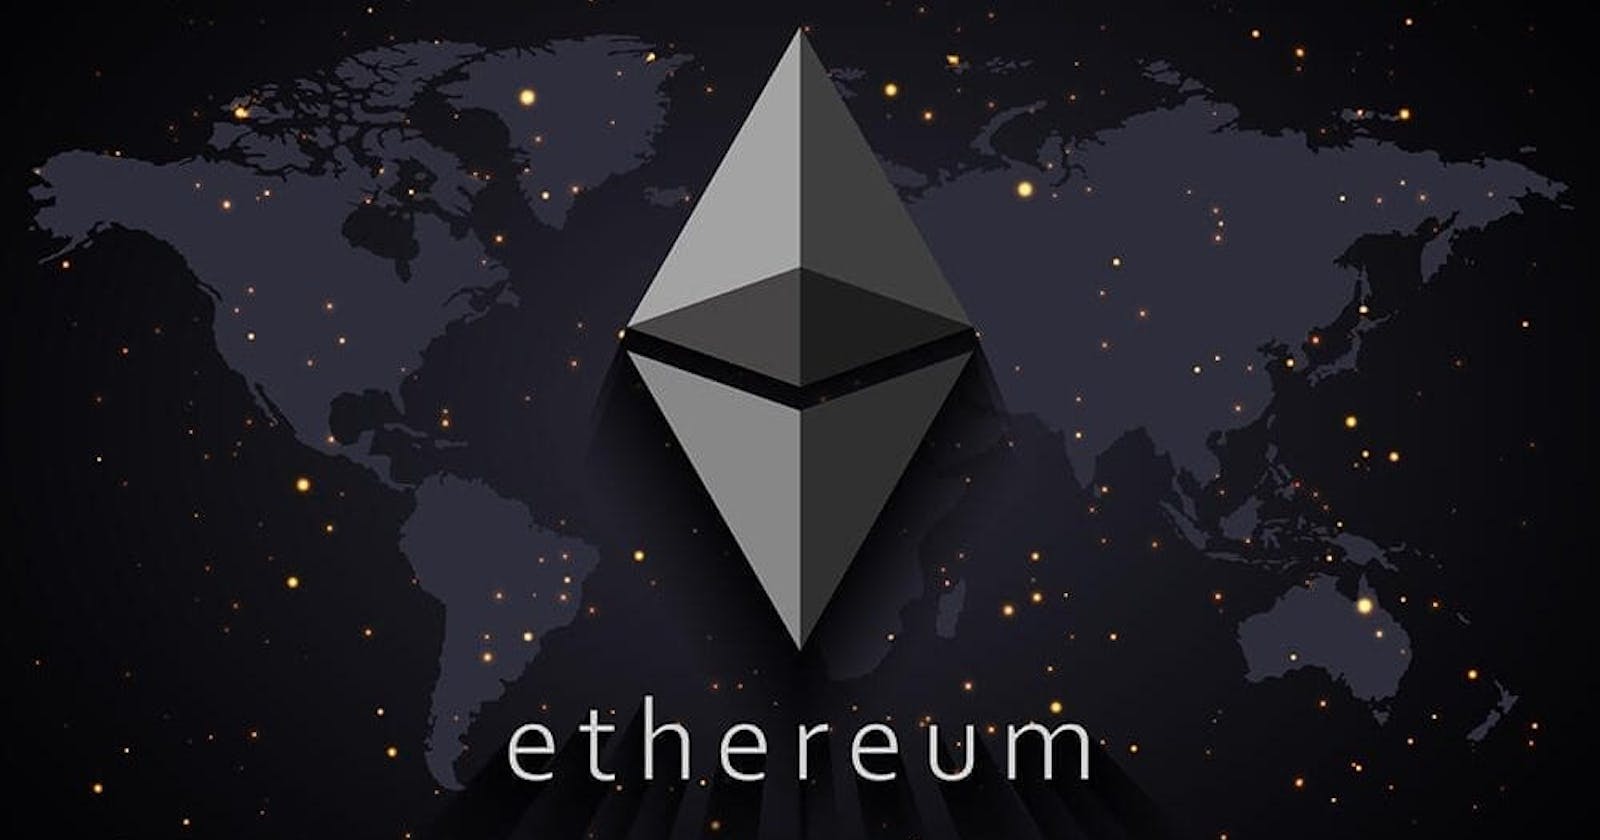 "The rise of Ethereum"